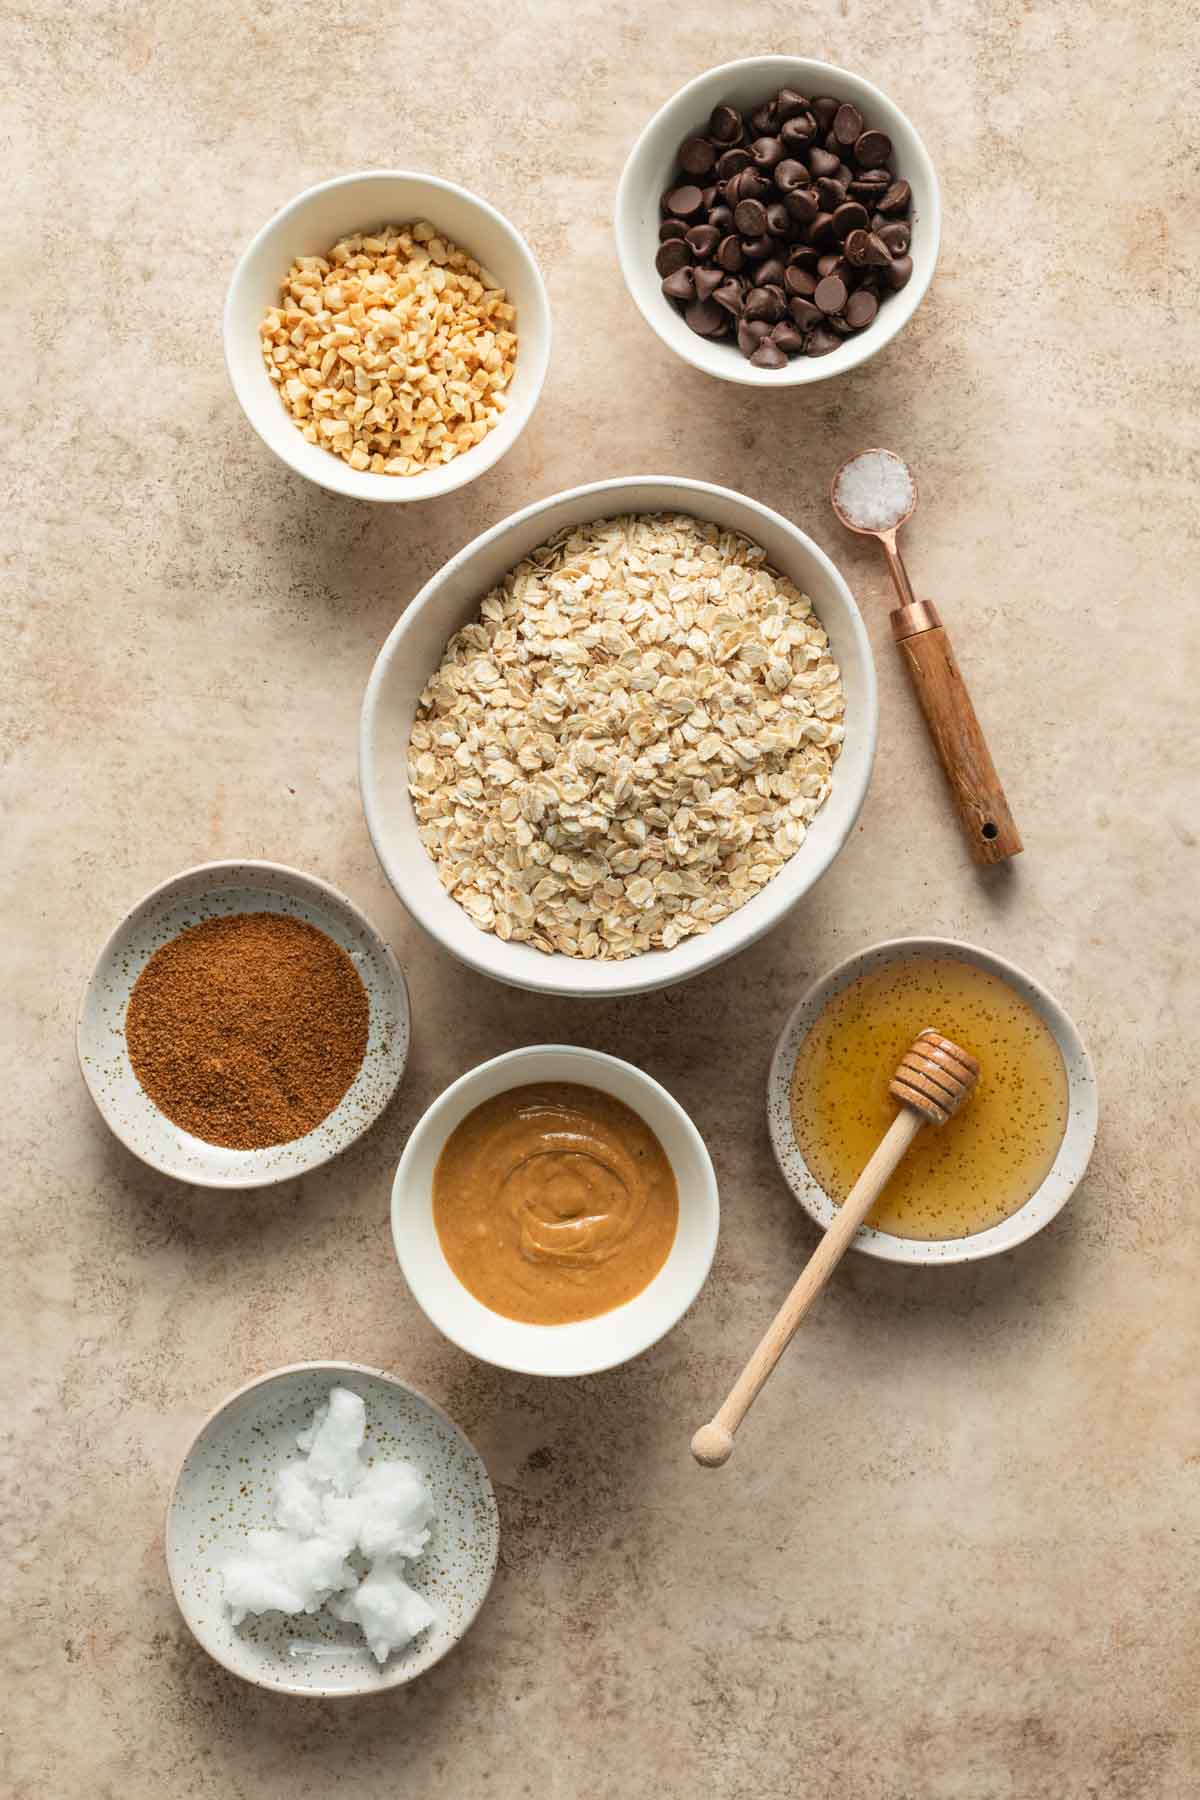 Ingredients to make peanut butter granola arranged individually.